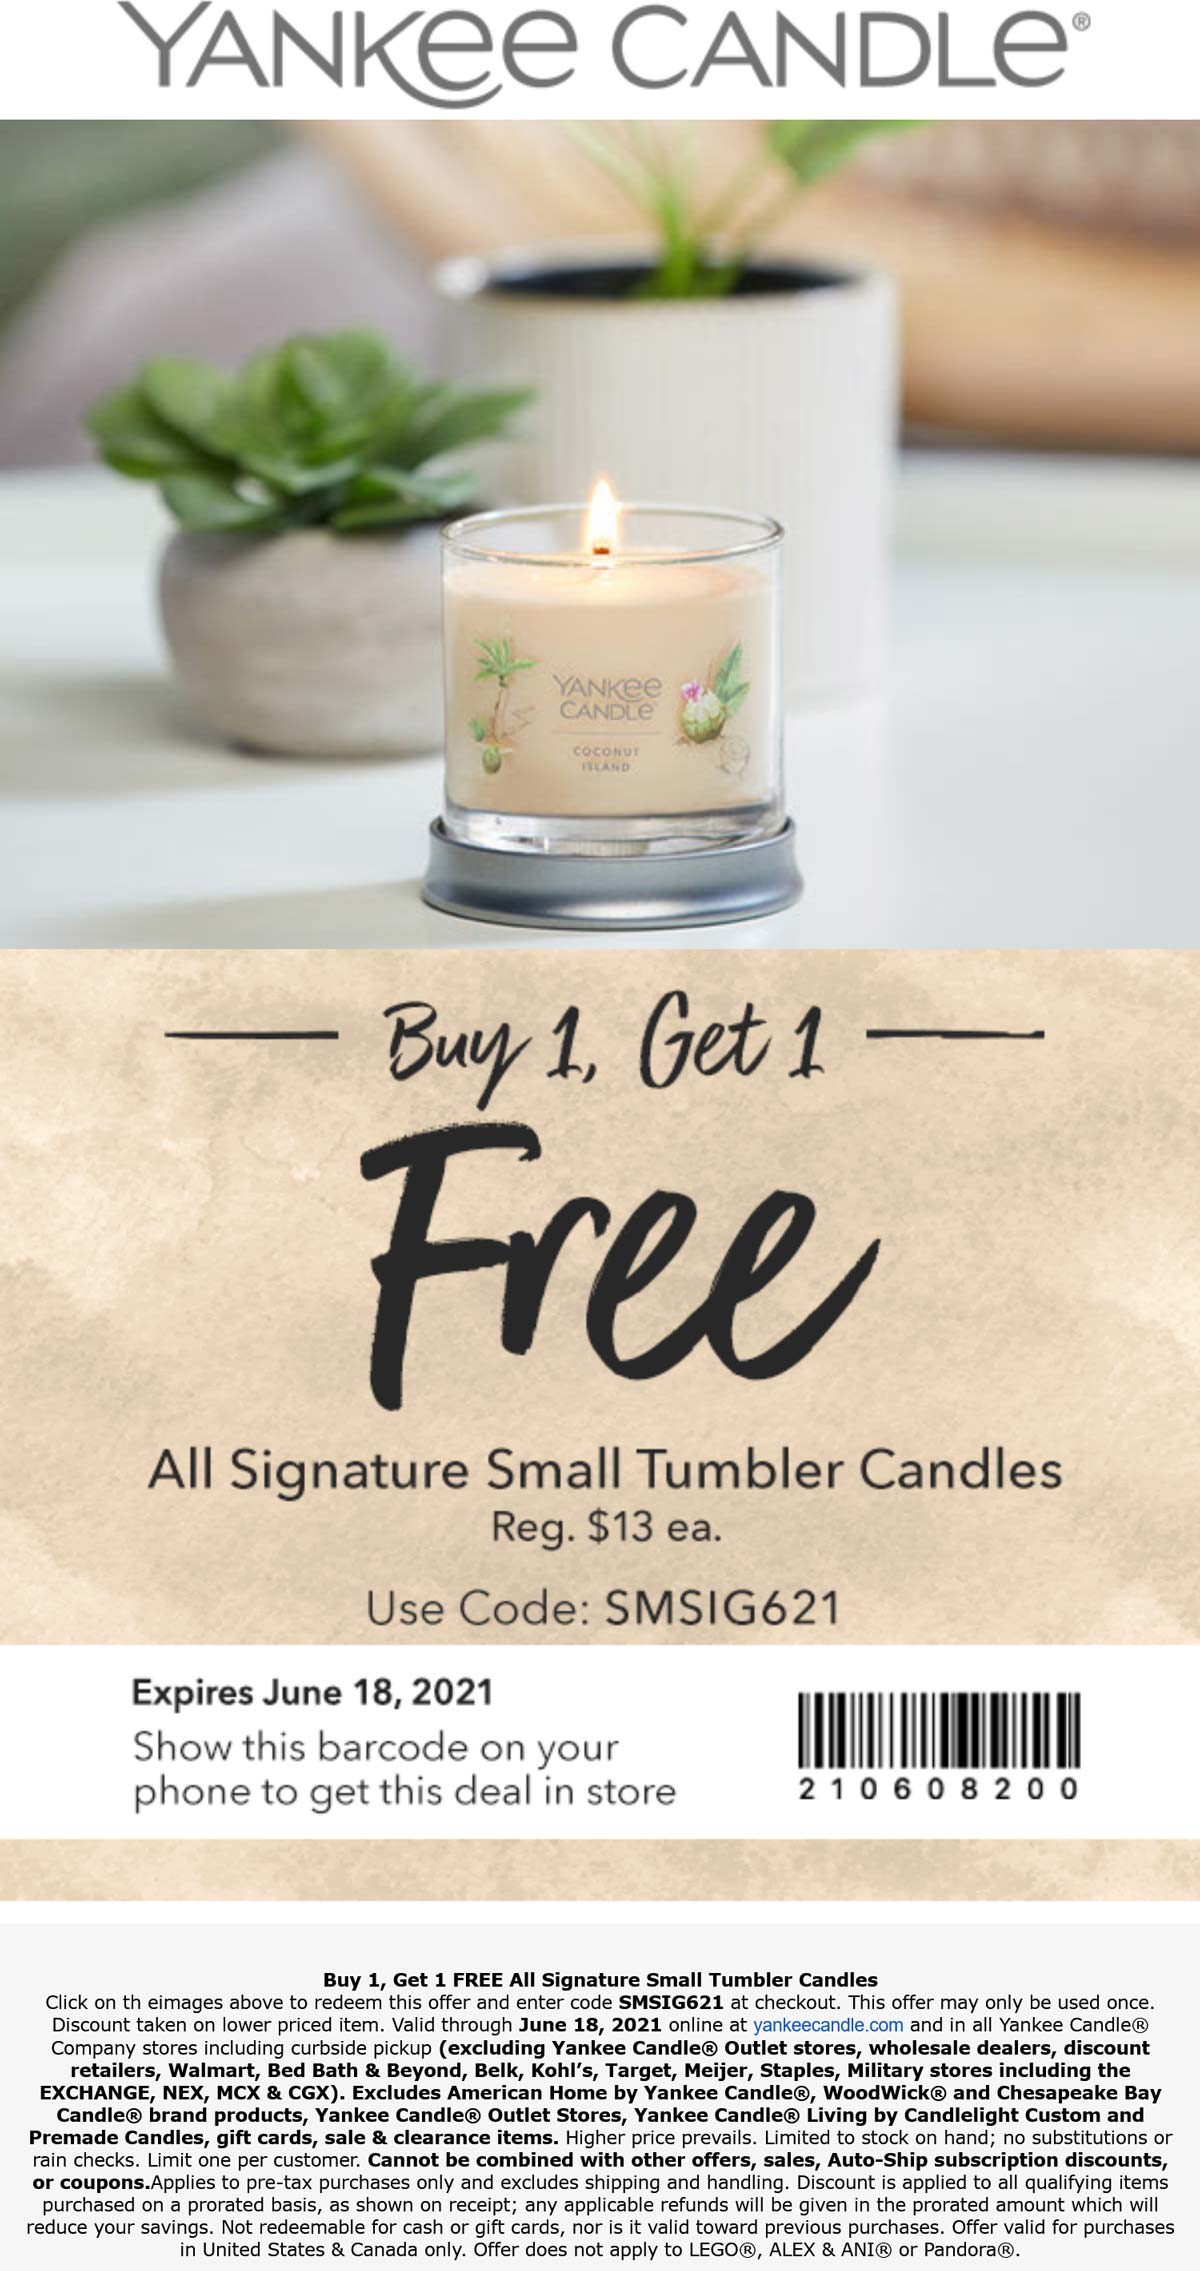 Second candle free at Yankee Candle, or online via promo code SMSIG621